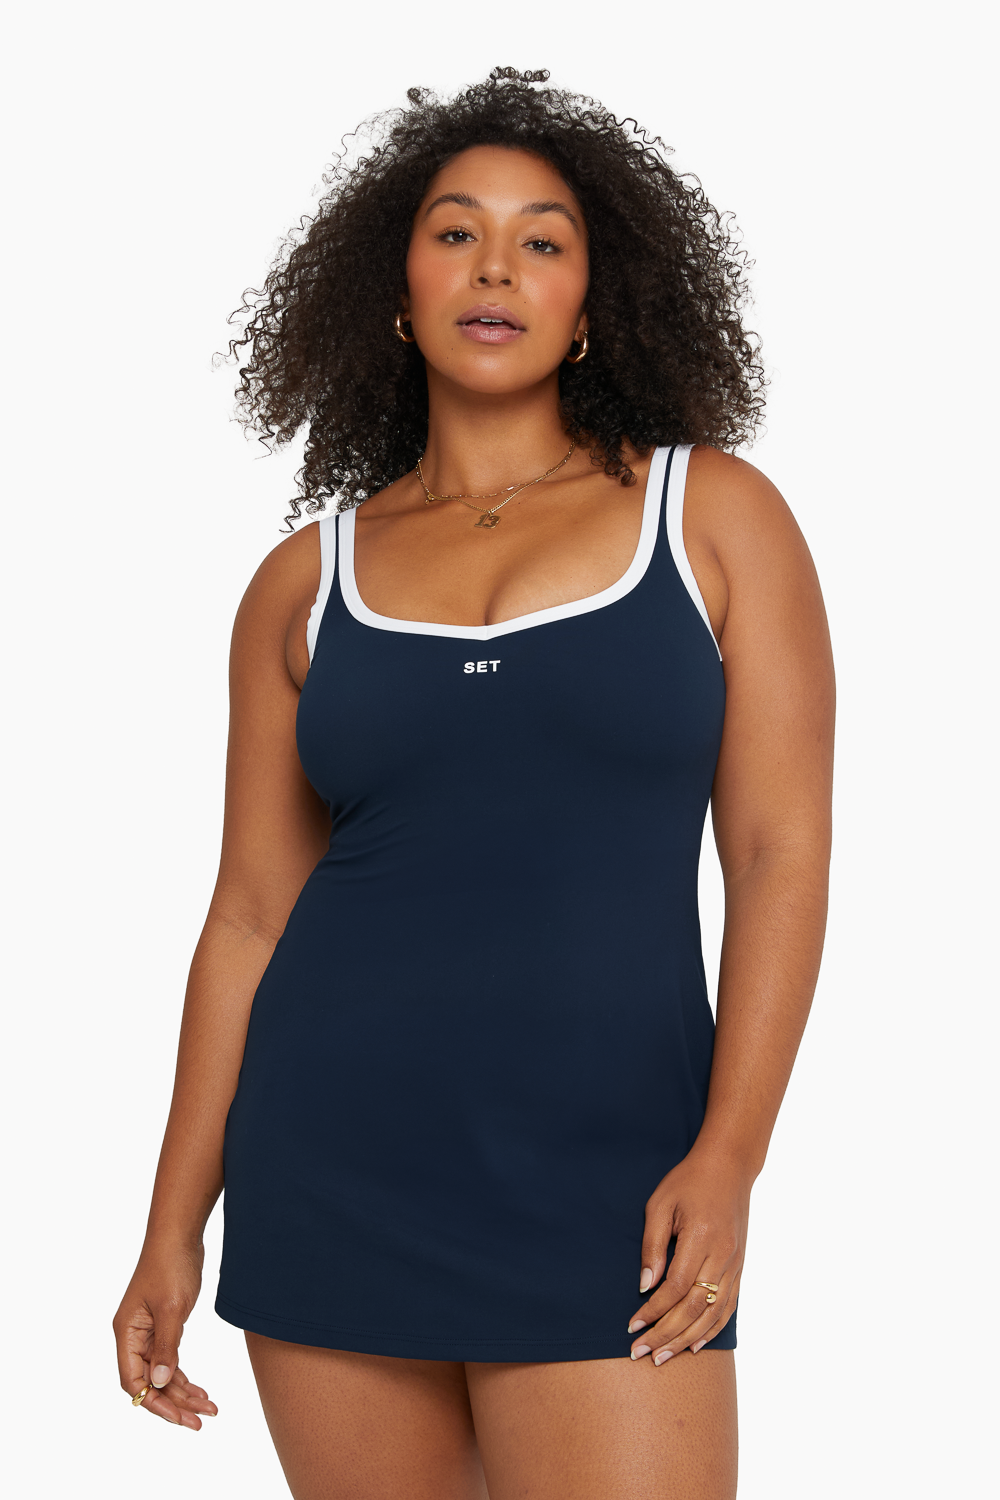 SPORTBODY® SWEETHEART DRESS - OXFORD Featured Image